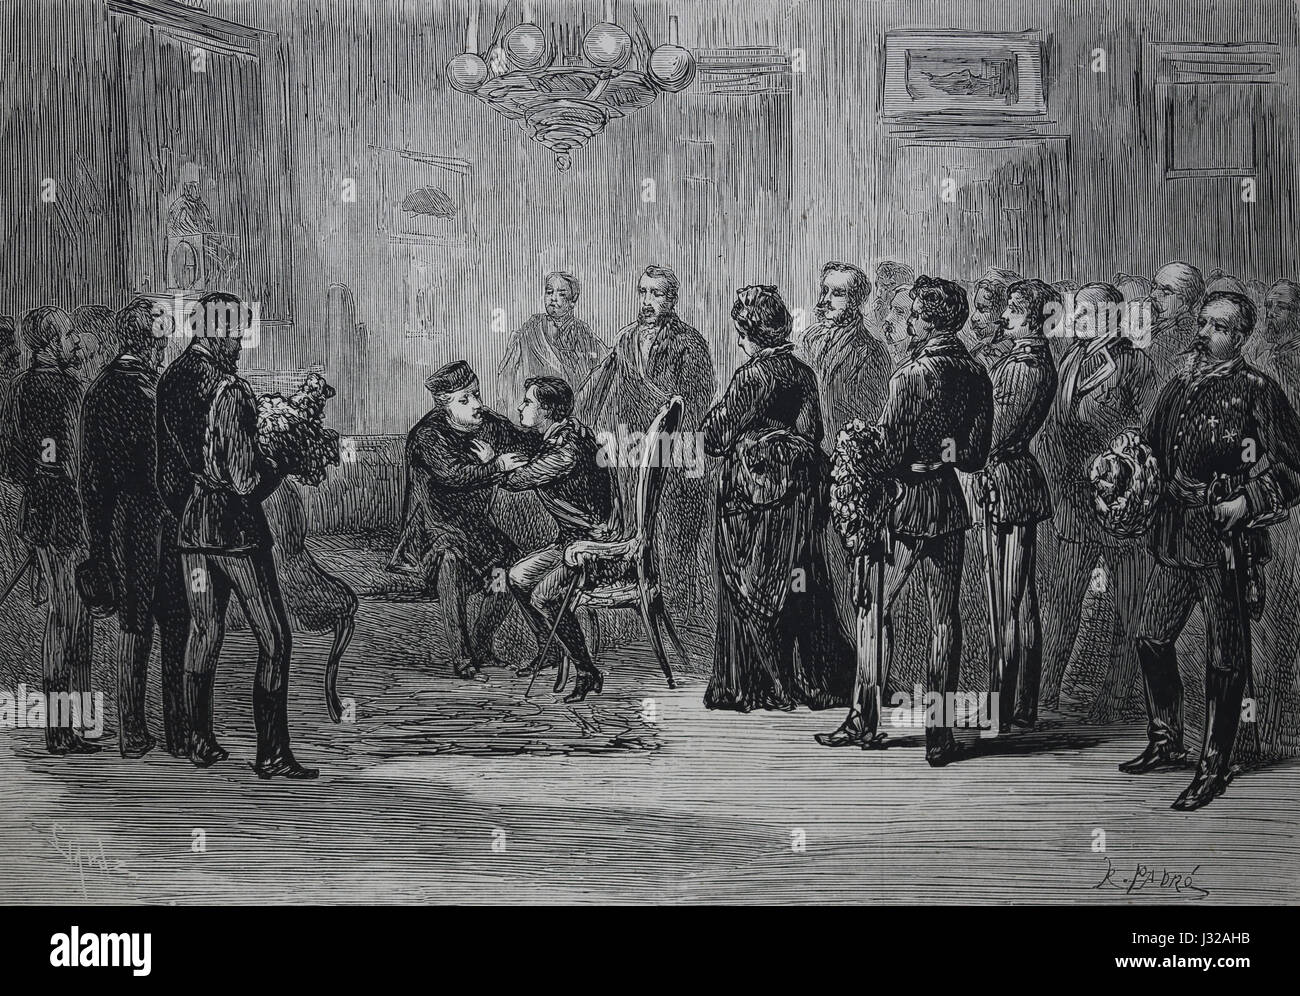 Meeting between king Alfonso XII and General Baldomero Espartero, Logrono, Spain. 1875. Spanish and America Illustration. Engraving. Stock Photo